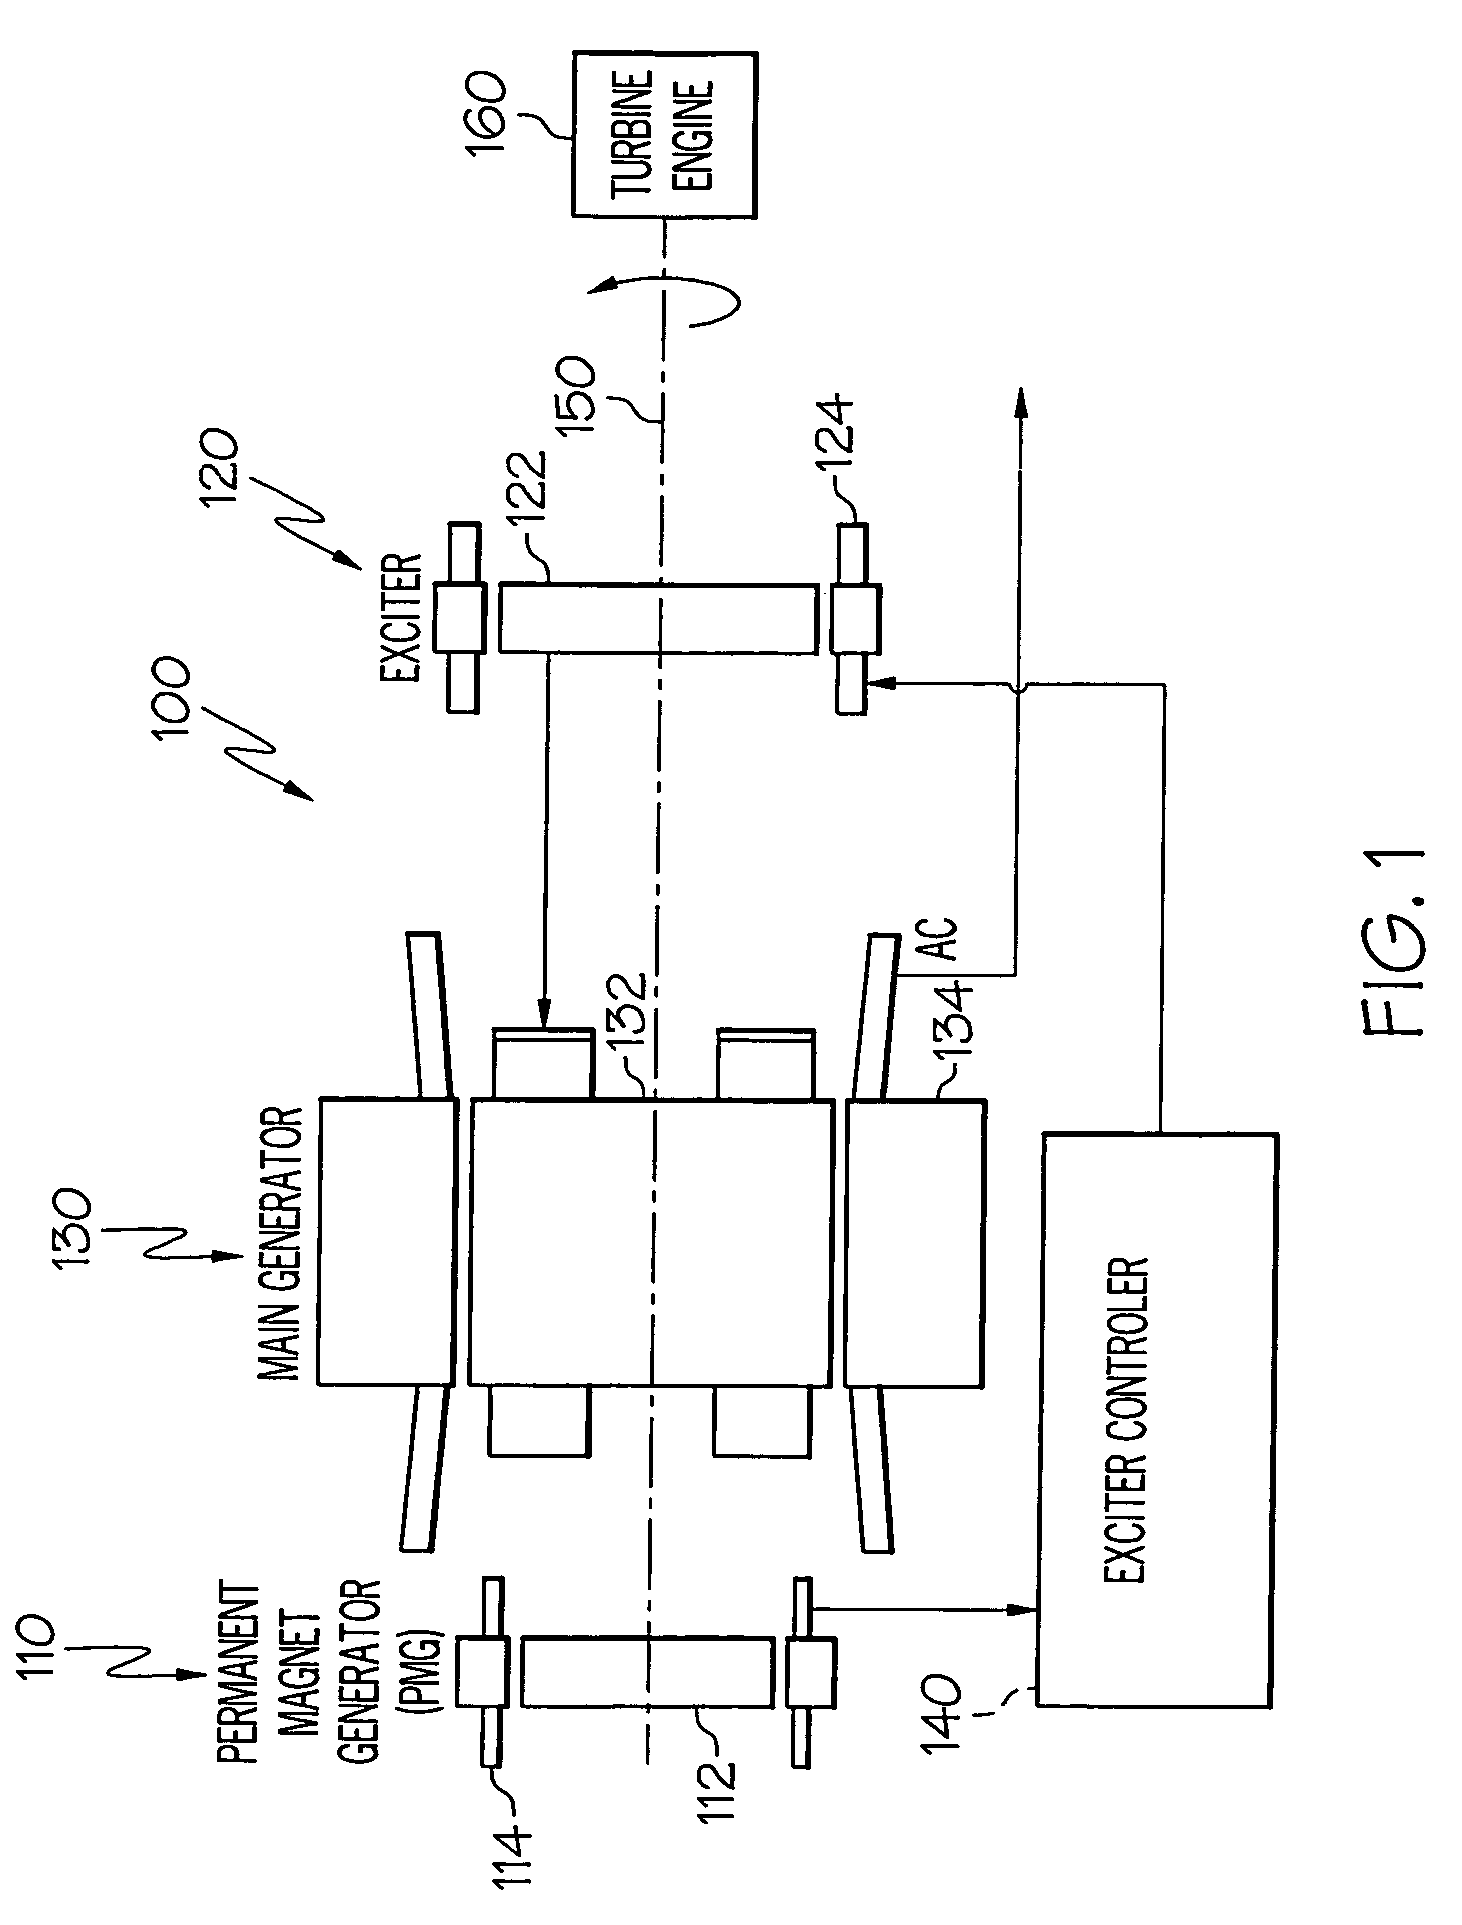 Brushless starter-generator with independently controllable exciter field